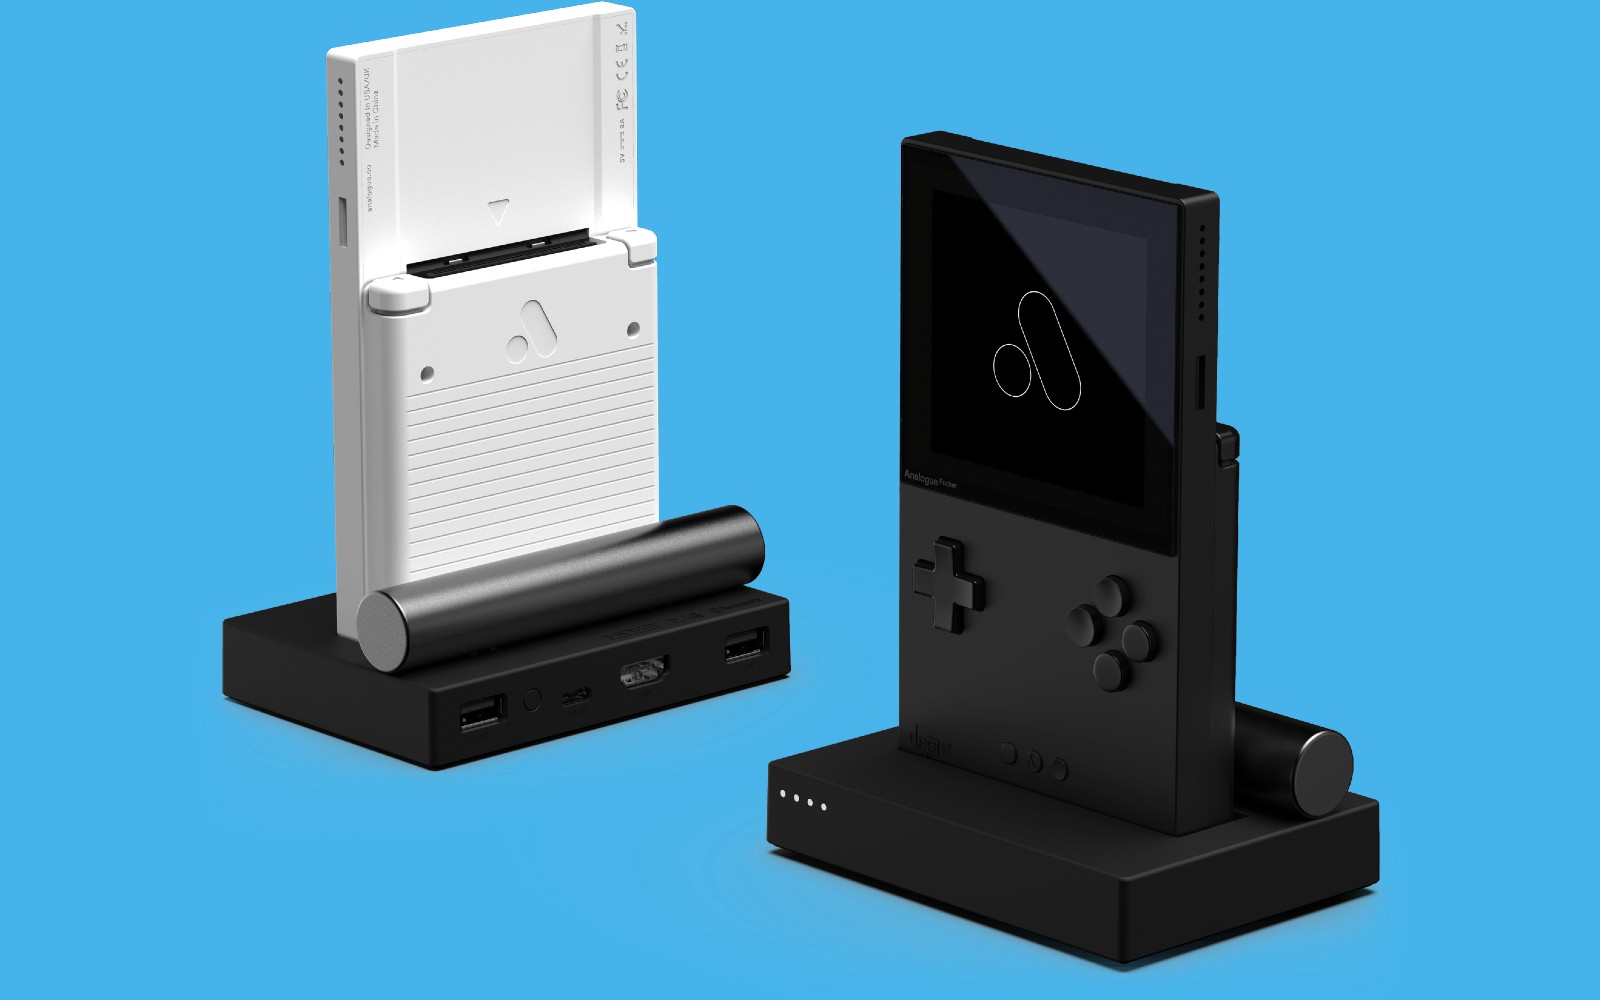 Analogue’s Pocket portable console delayed for a third time, now till December